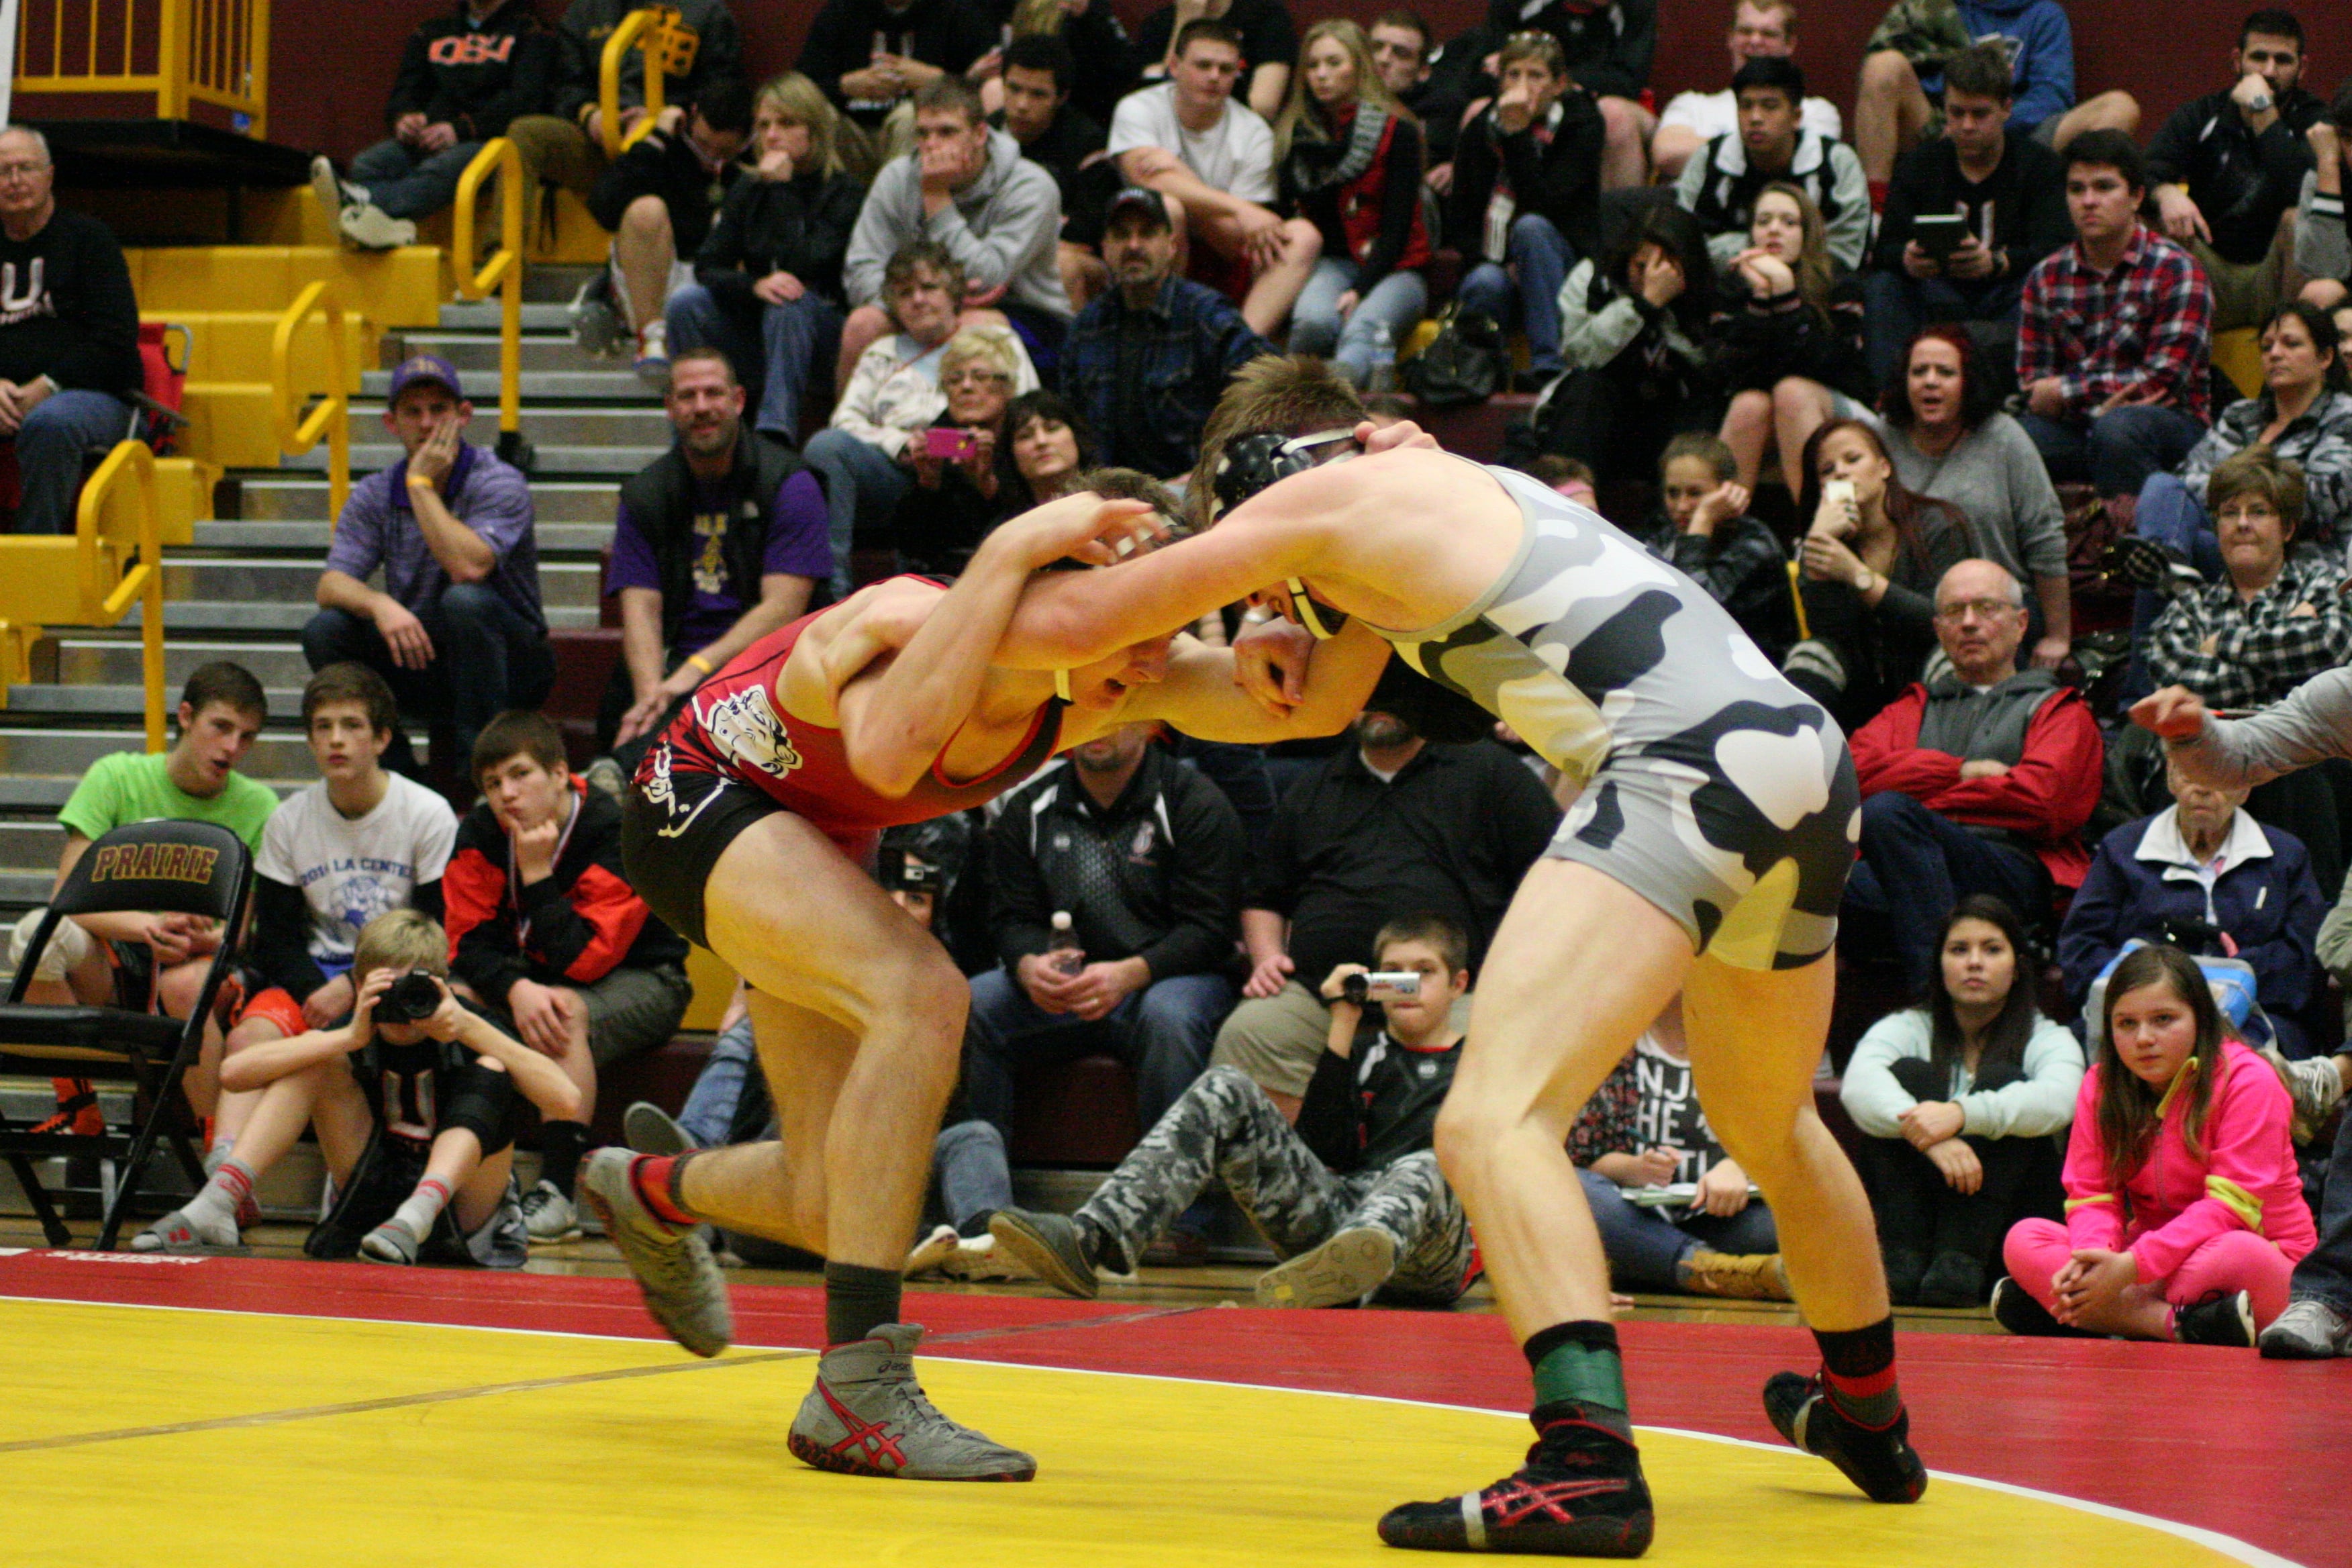 The crowd hits fever pitch as both wrestlers leave it all out on the mat in the final round. Tommy Strassenberg held on for a 5-3 victory against Bryant Elliott in the 145-pound boys county title match.